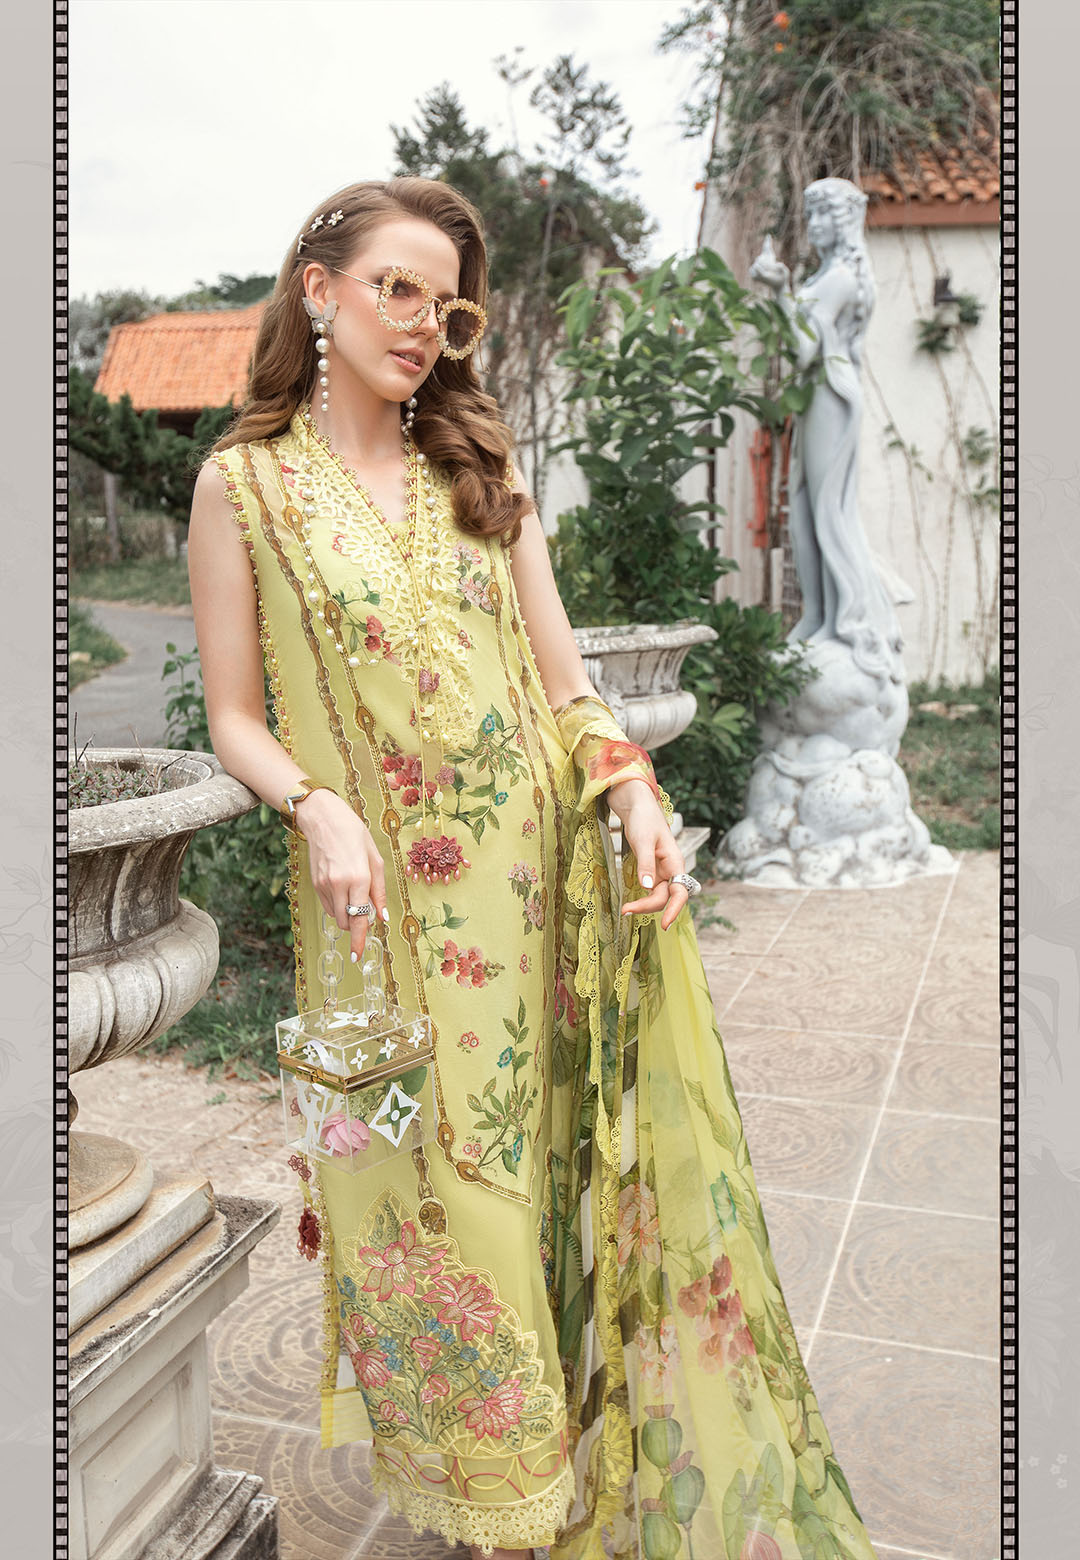 Buy Now, 6A - M Prints - Eid Edit 2023 - Maria. B in UK - Shahana Collection UK - Wedding and Bridal Party Dresses